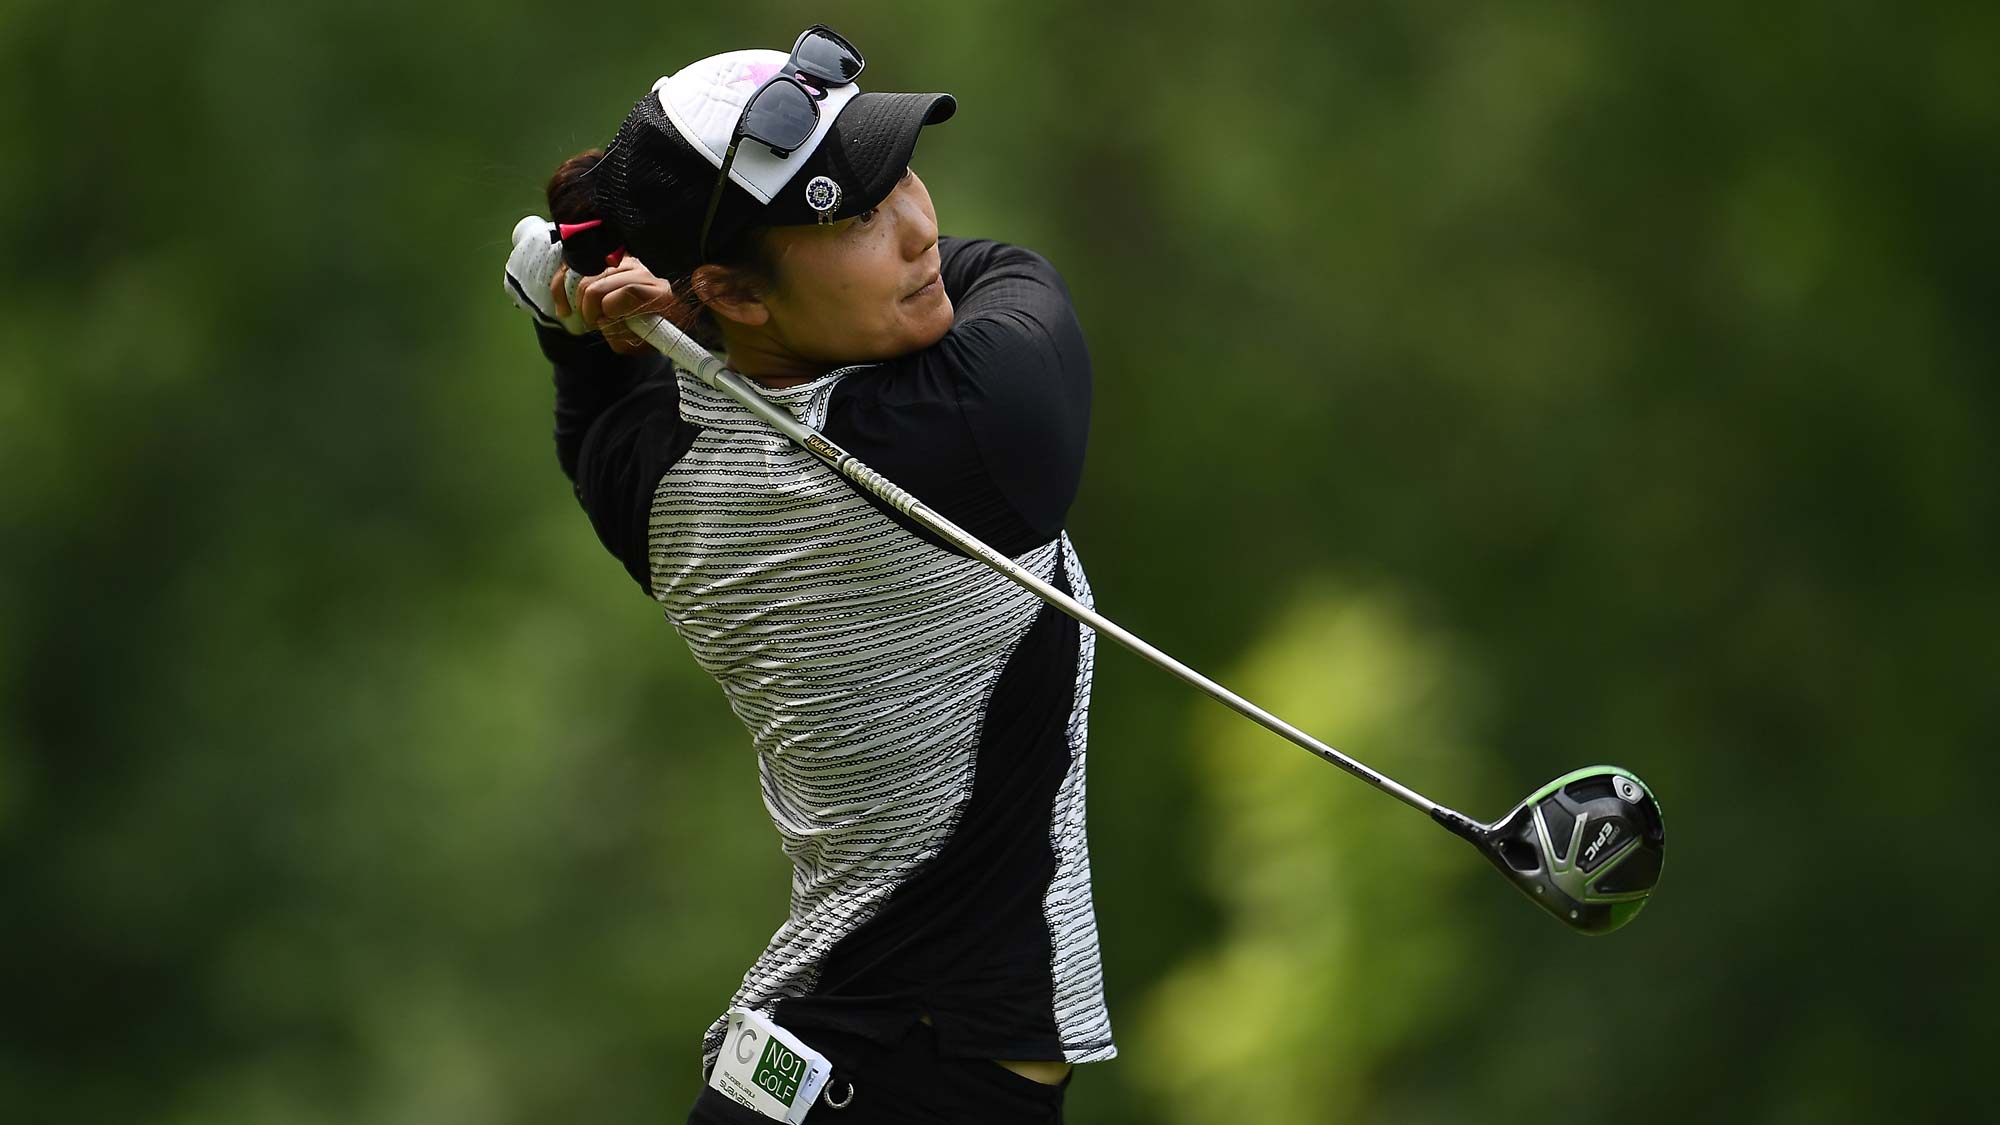 Tiffany Joh hits her tee shot on the third hole during the final round of the Thornberry Creek LPGA Classic